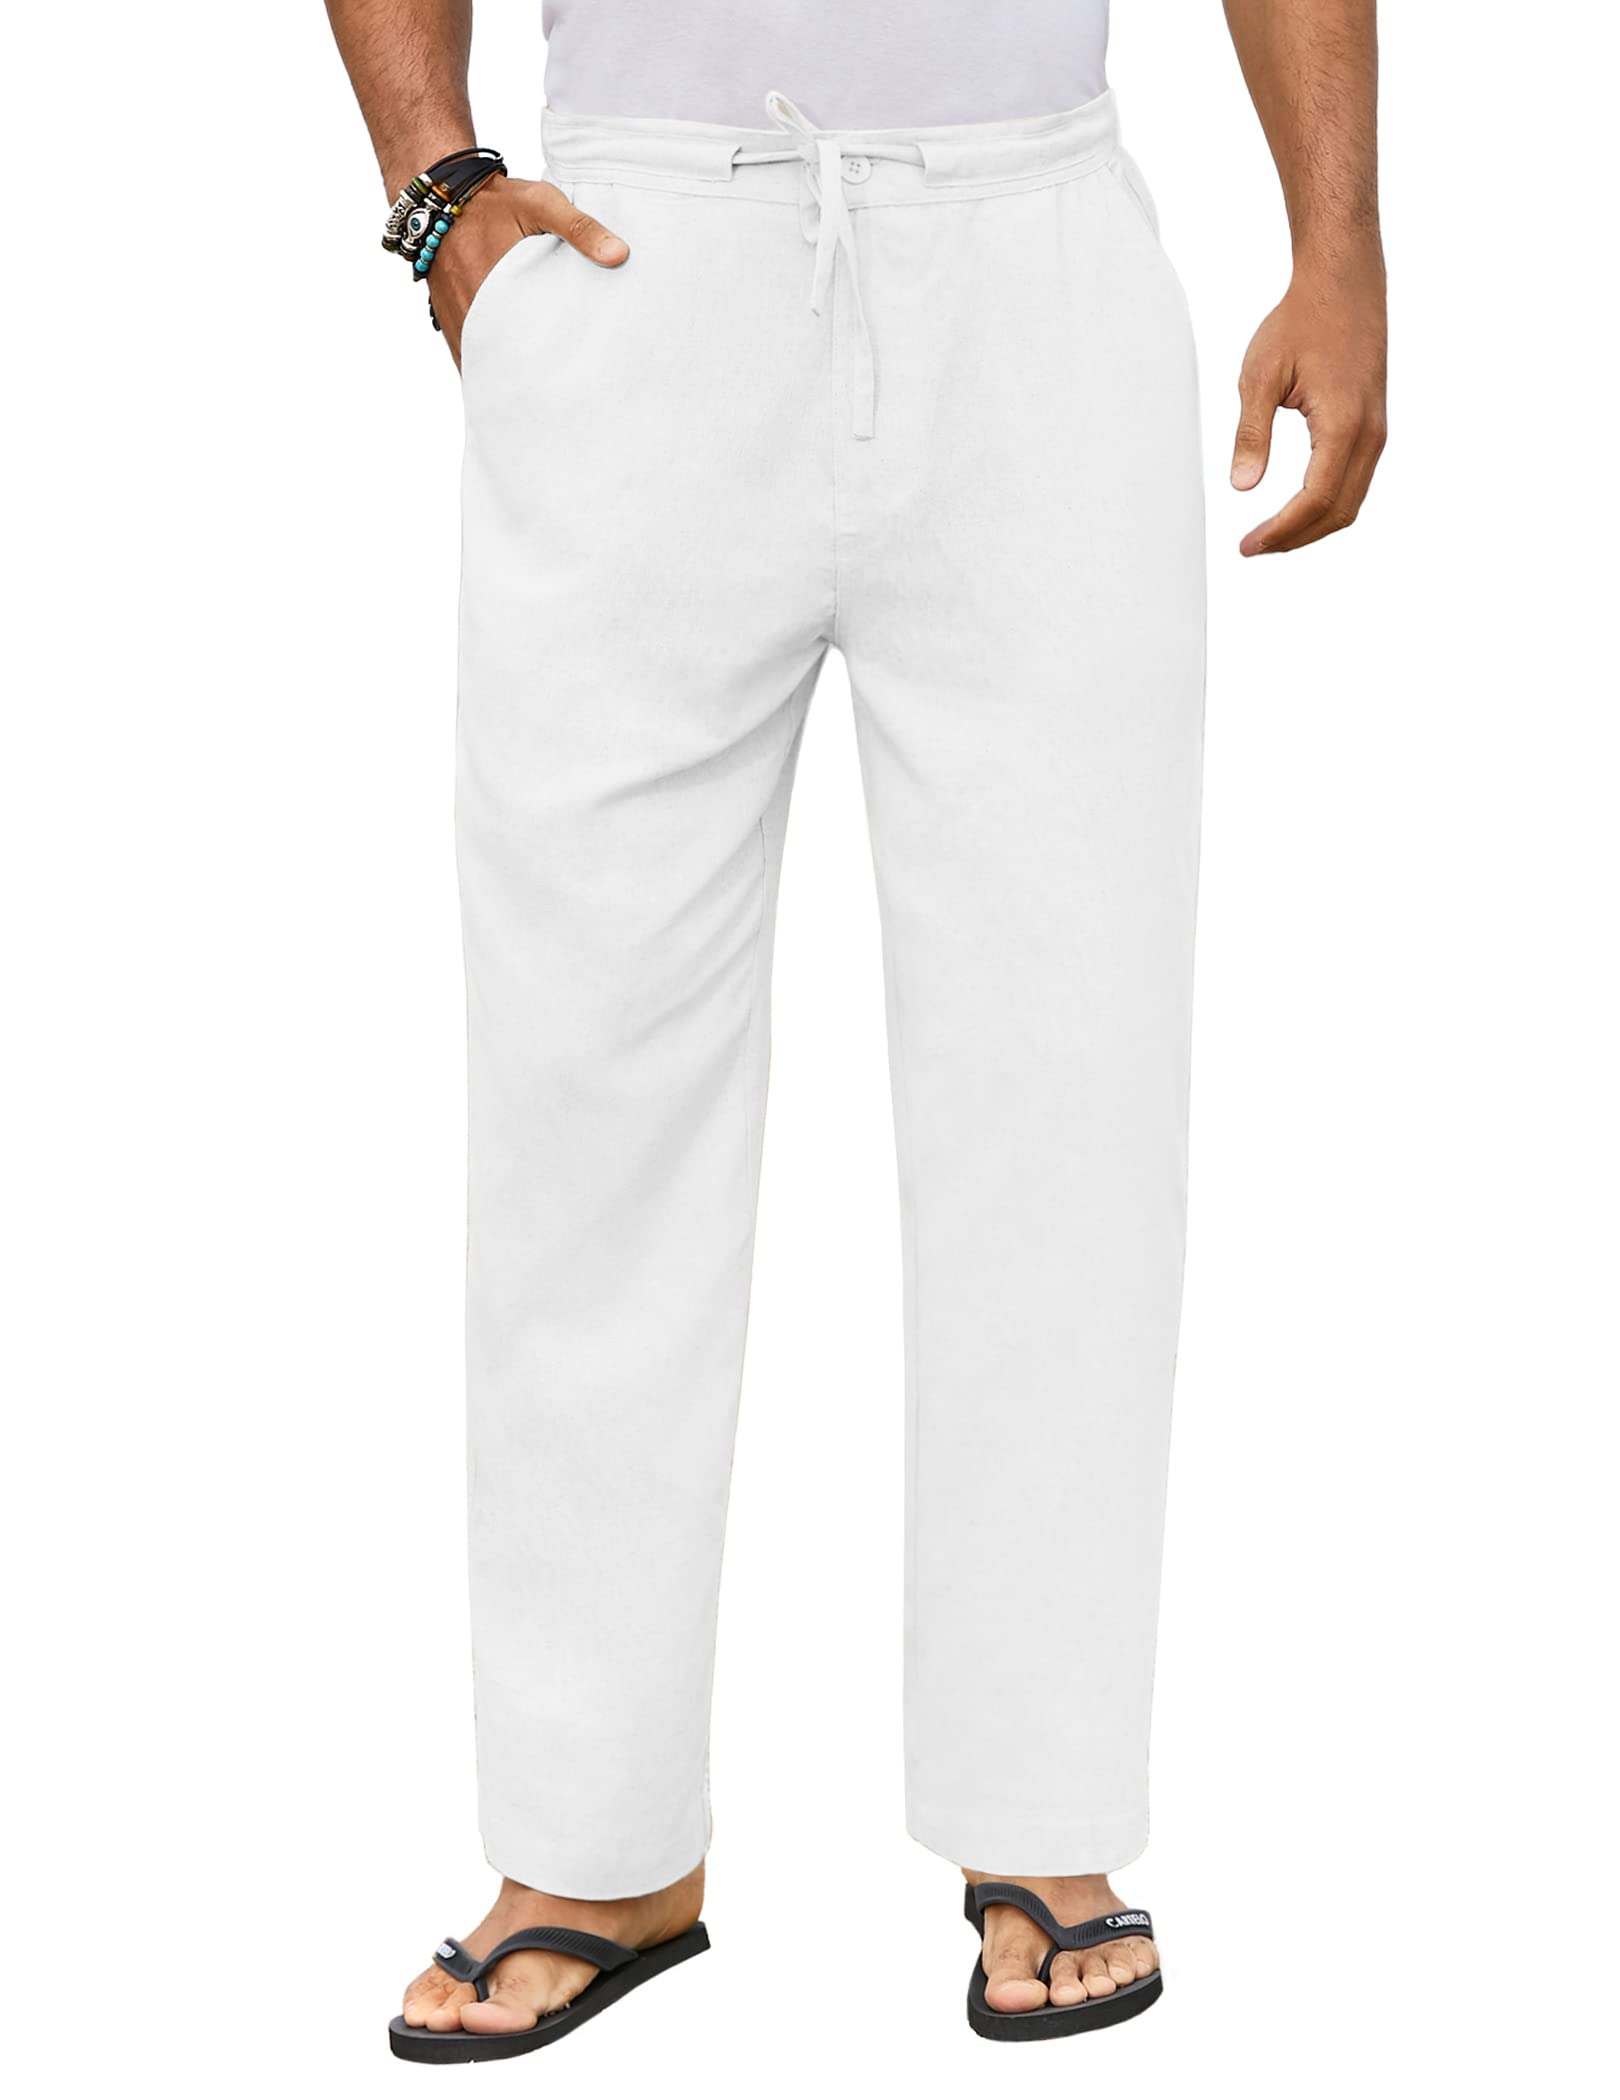 UA CHEF Houndstooth White Women's 4-Pocket Pant|Houndstooth Pants